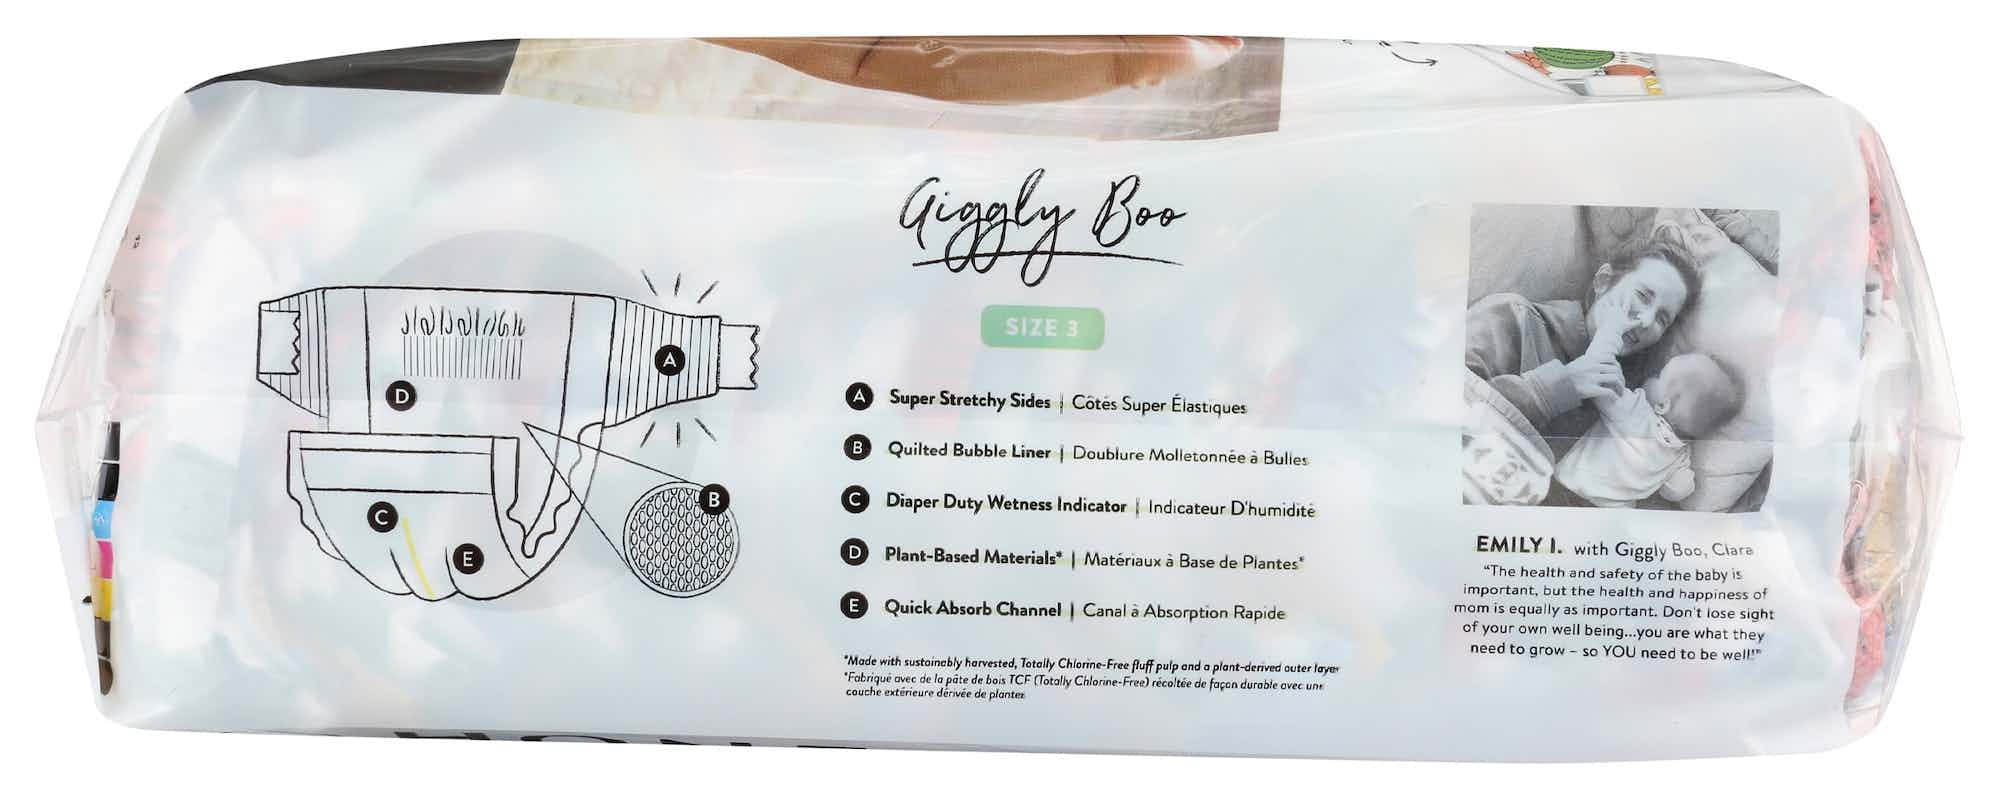 The Honest Company Baby Diapers